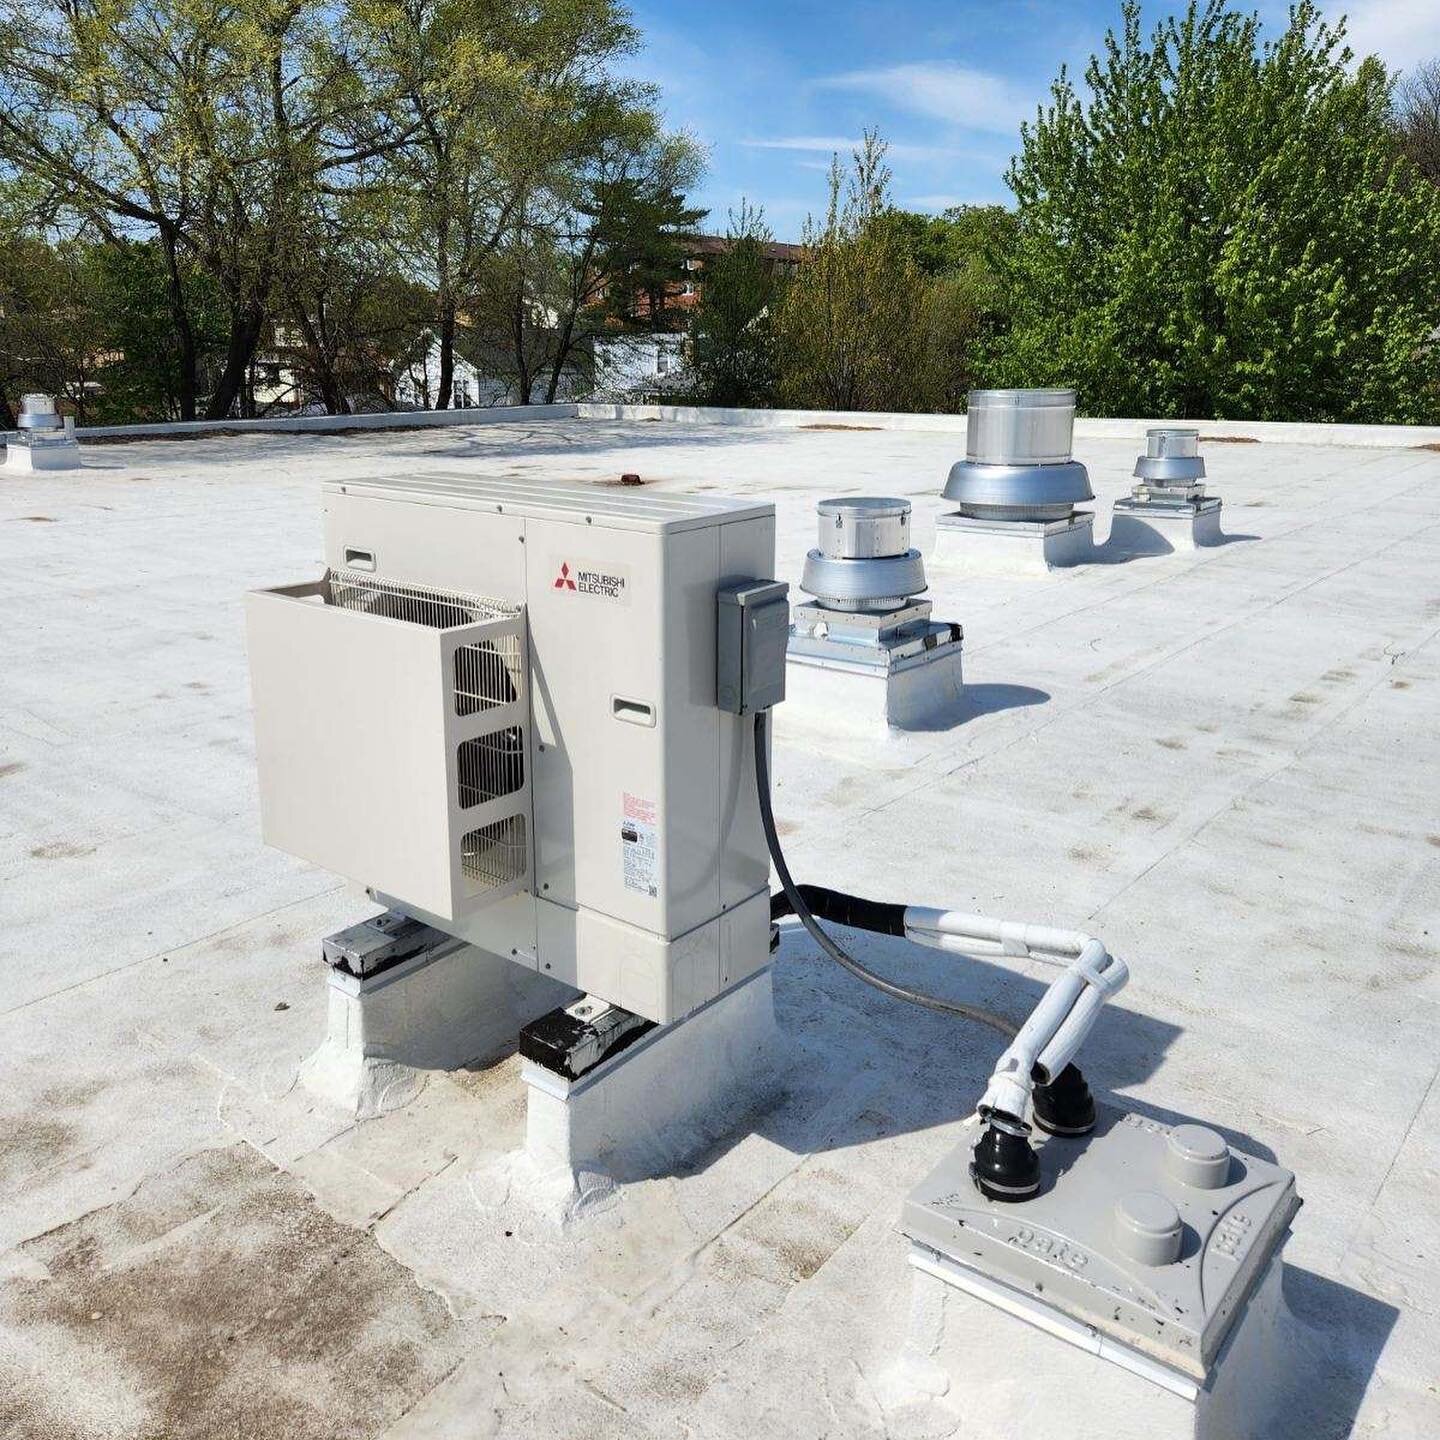 🚨 New Project 🚨 We recently installed a replacement @mitsubishihvac split system at Daniel C. Beard Elementary School, @chipubschools. This newly installed unit is for the IT room, which is a critical part of their operation. The school opted for a